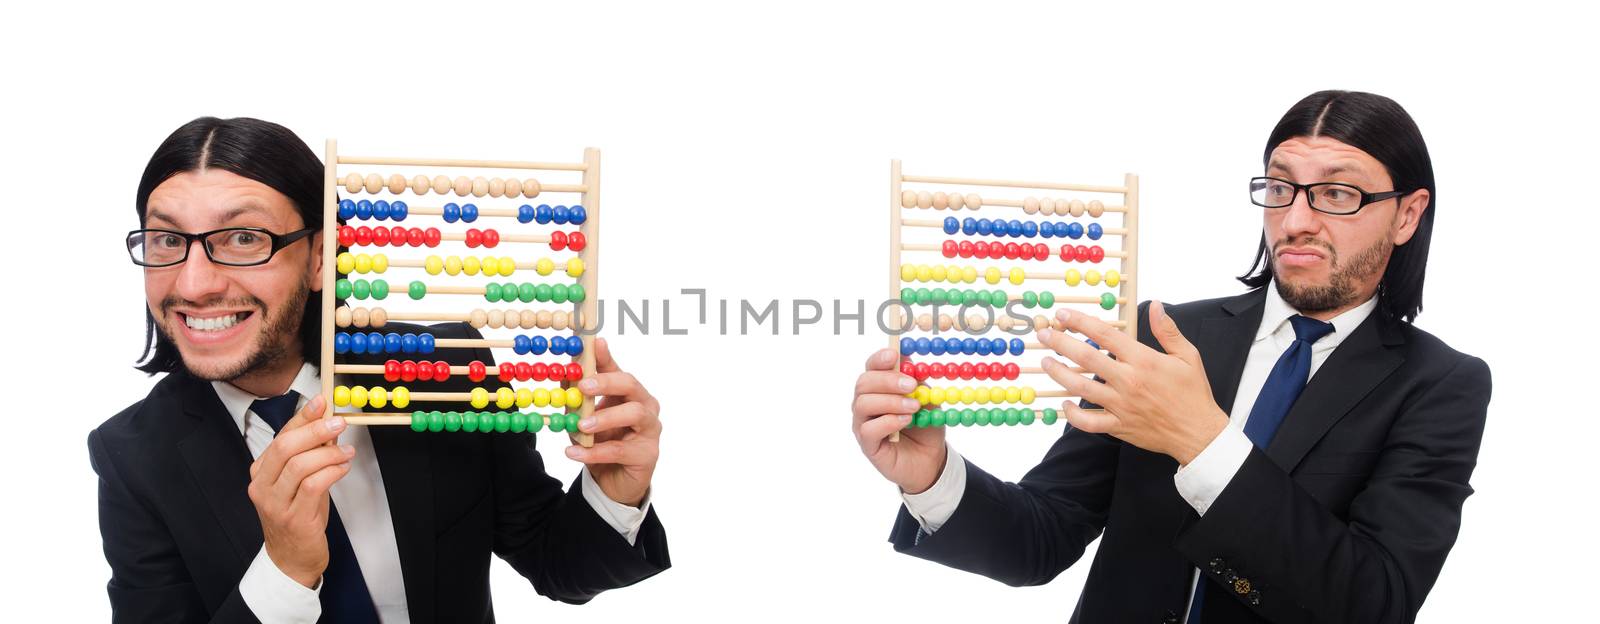 Funny man with calculator and abacus by Elnur